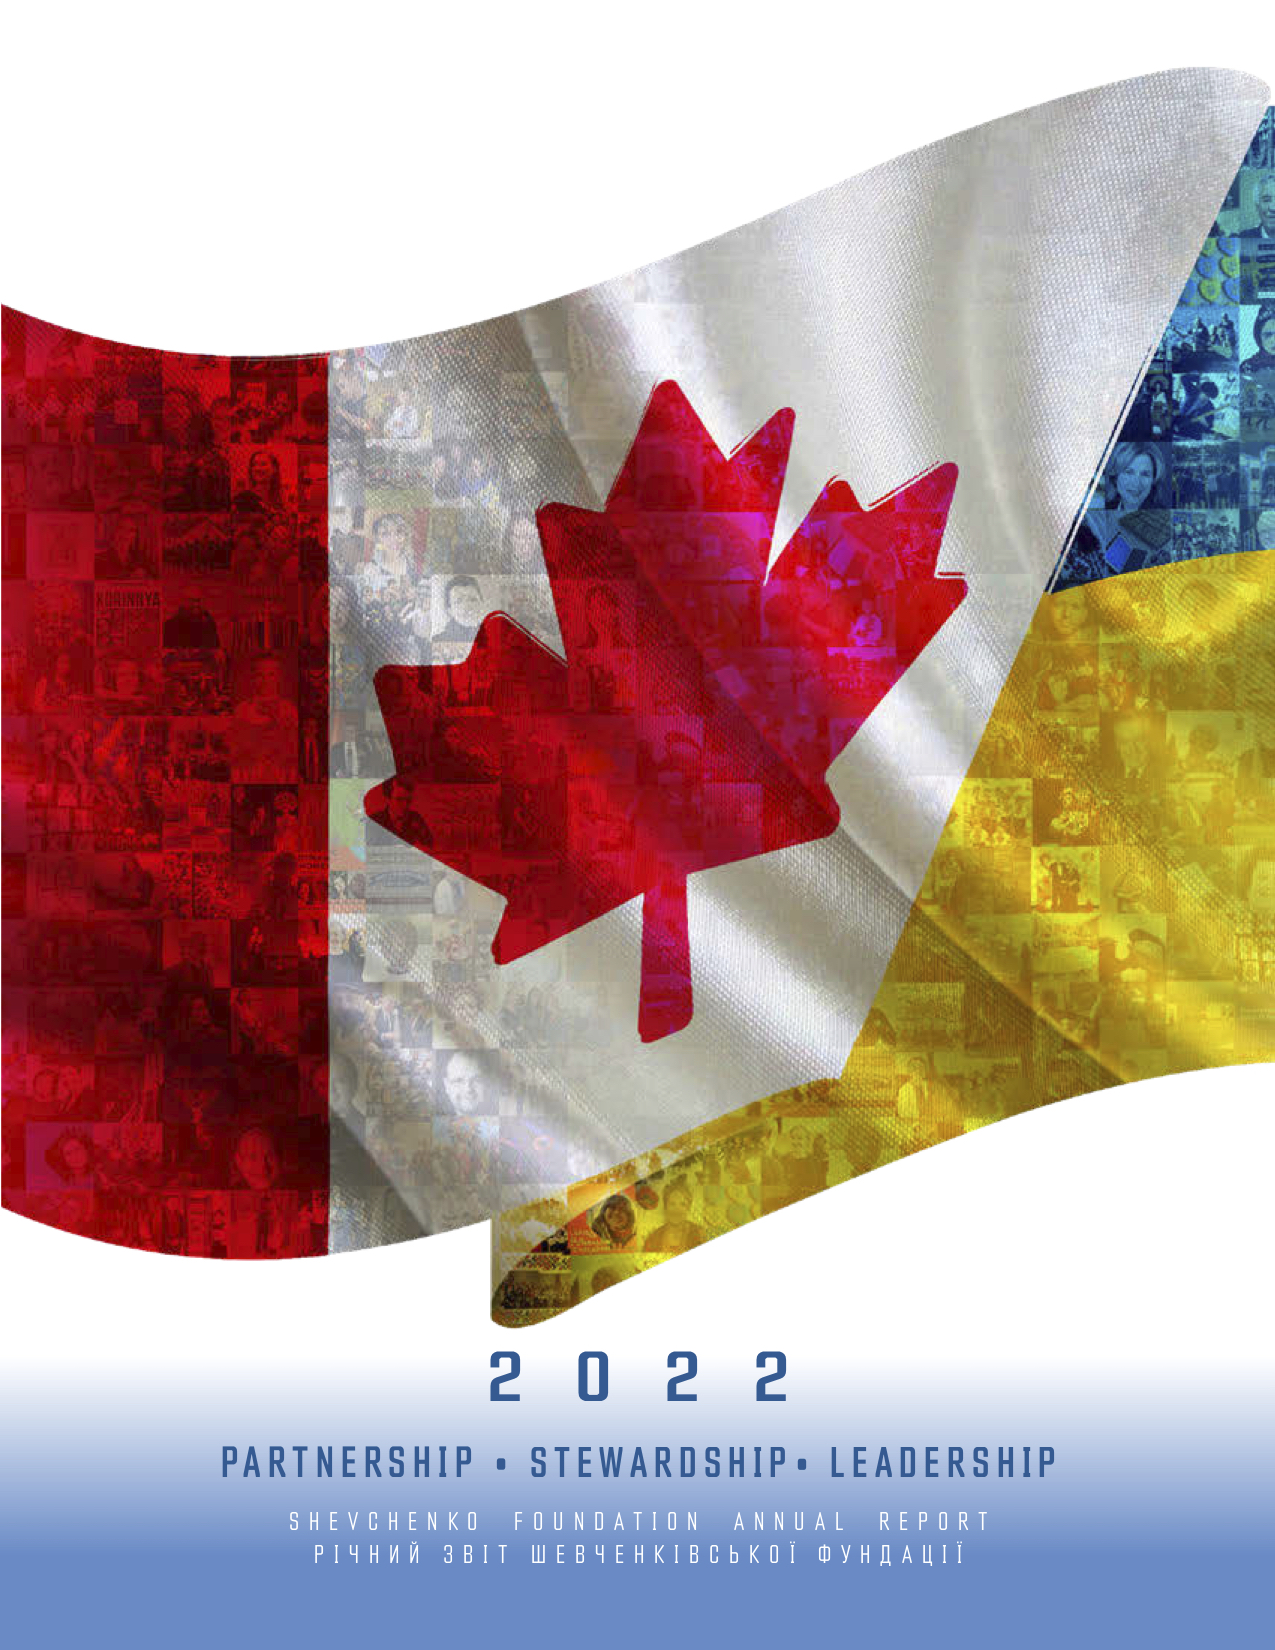 TSF 2022 Annual Report is now available!